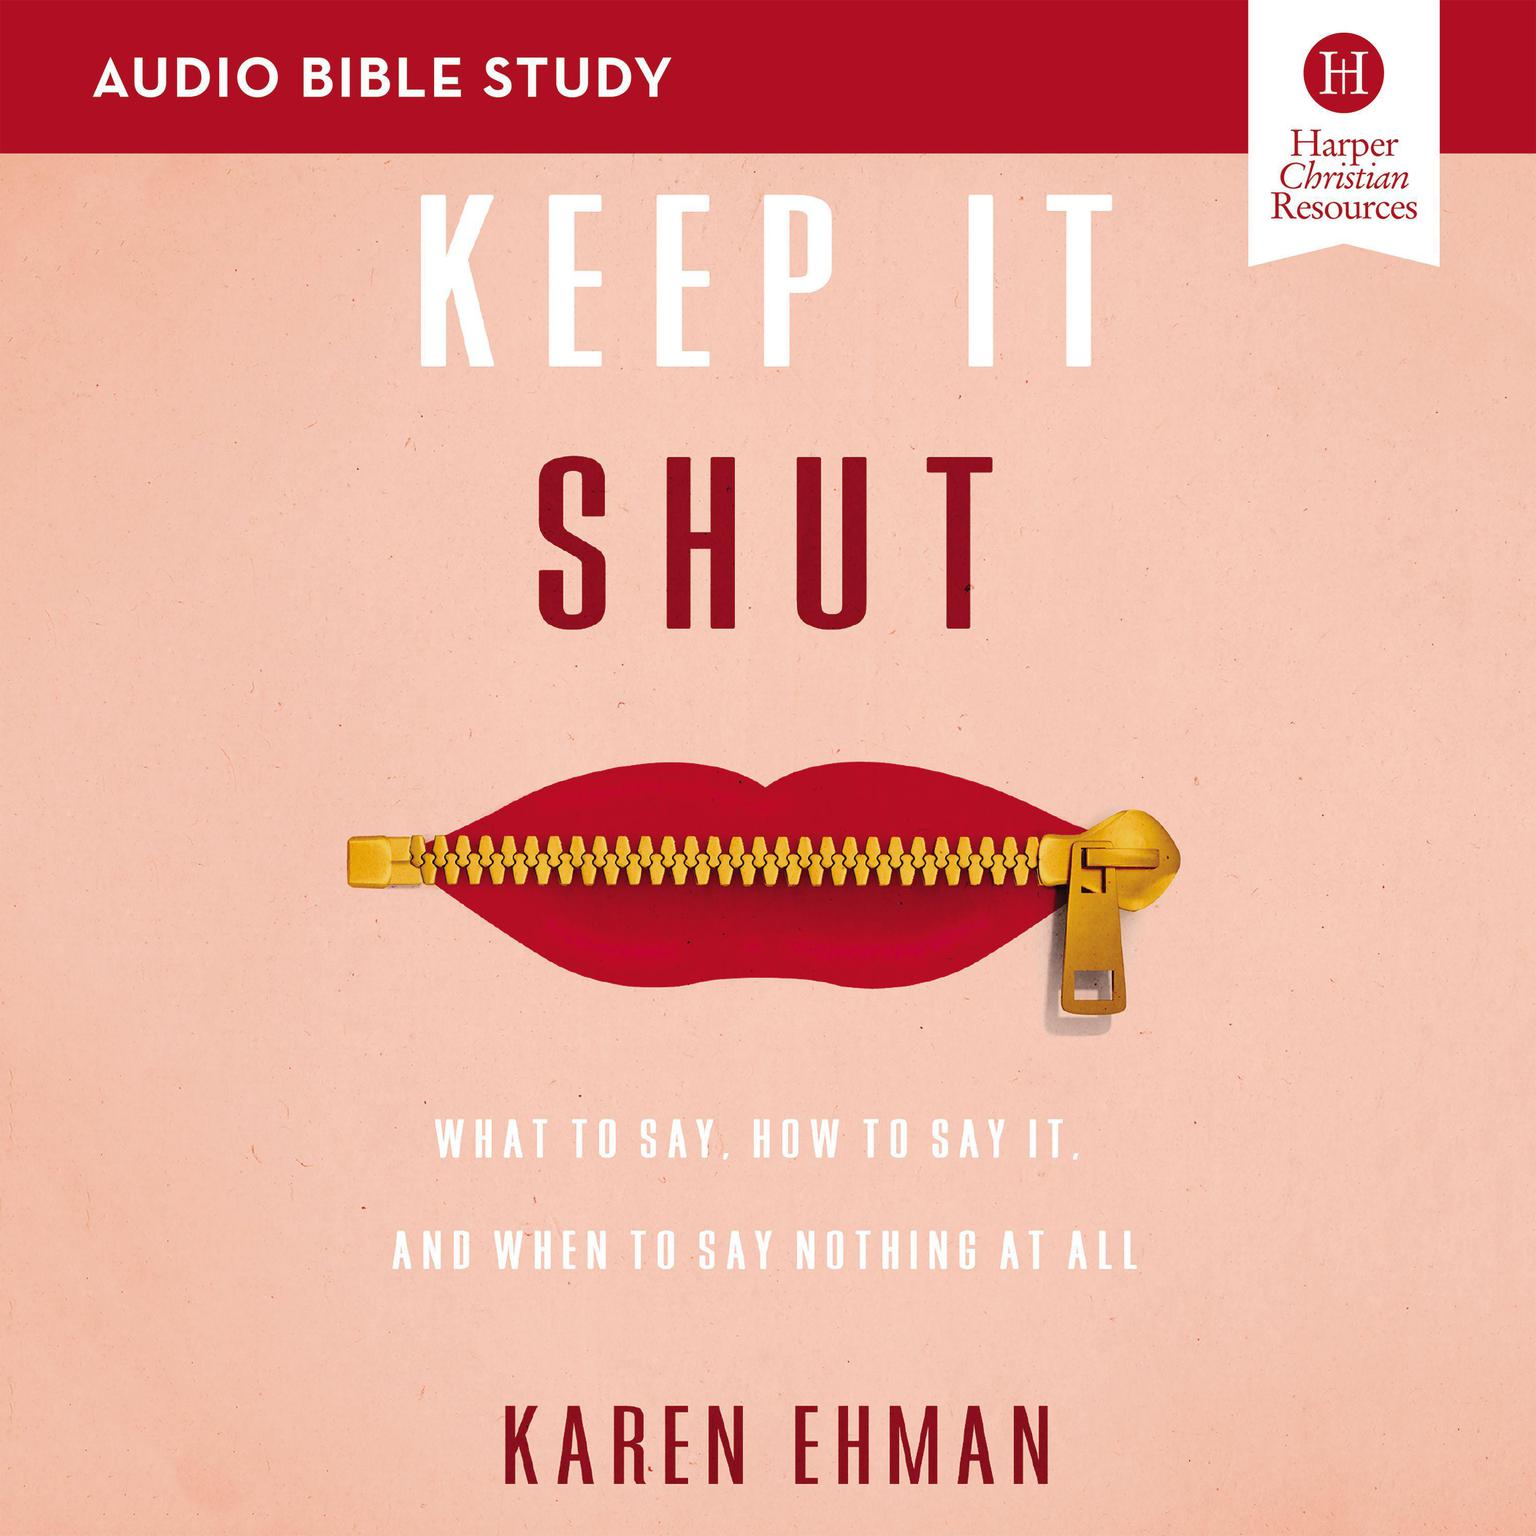 Keep It Shut: Audio Bible Studies: What to Say, How to Say It, and When to Say Nothing At All Audiobook, by Karen Ehman